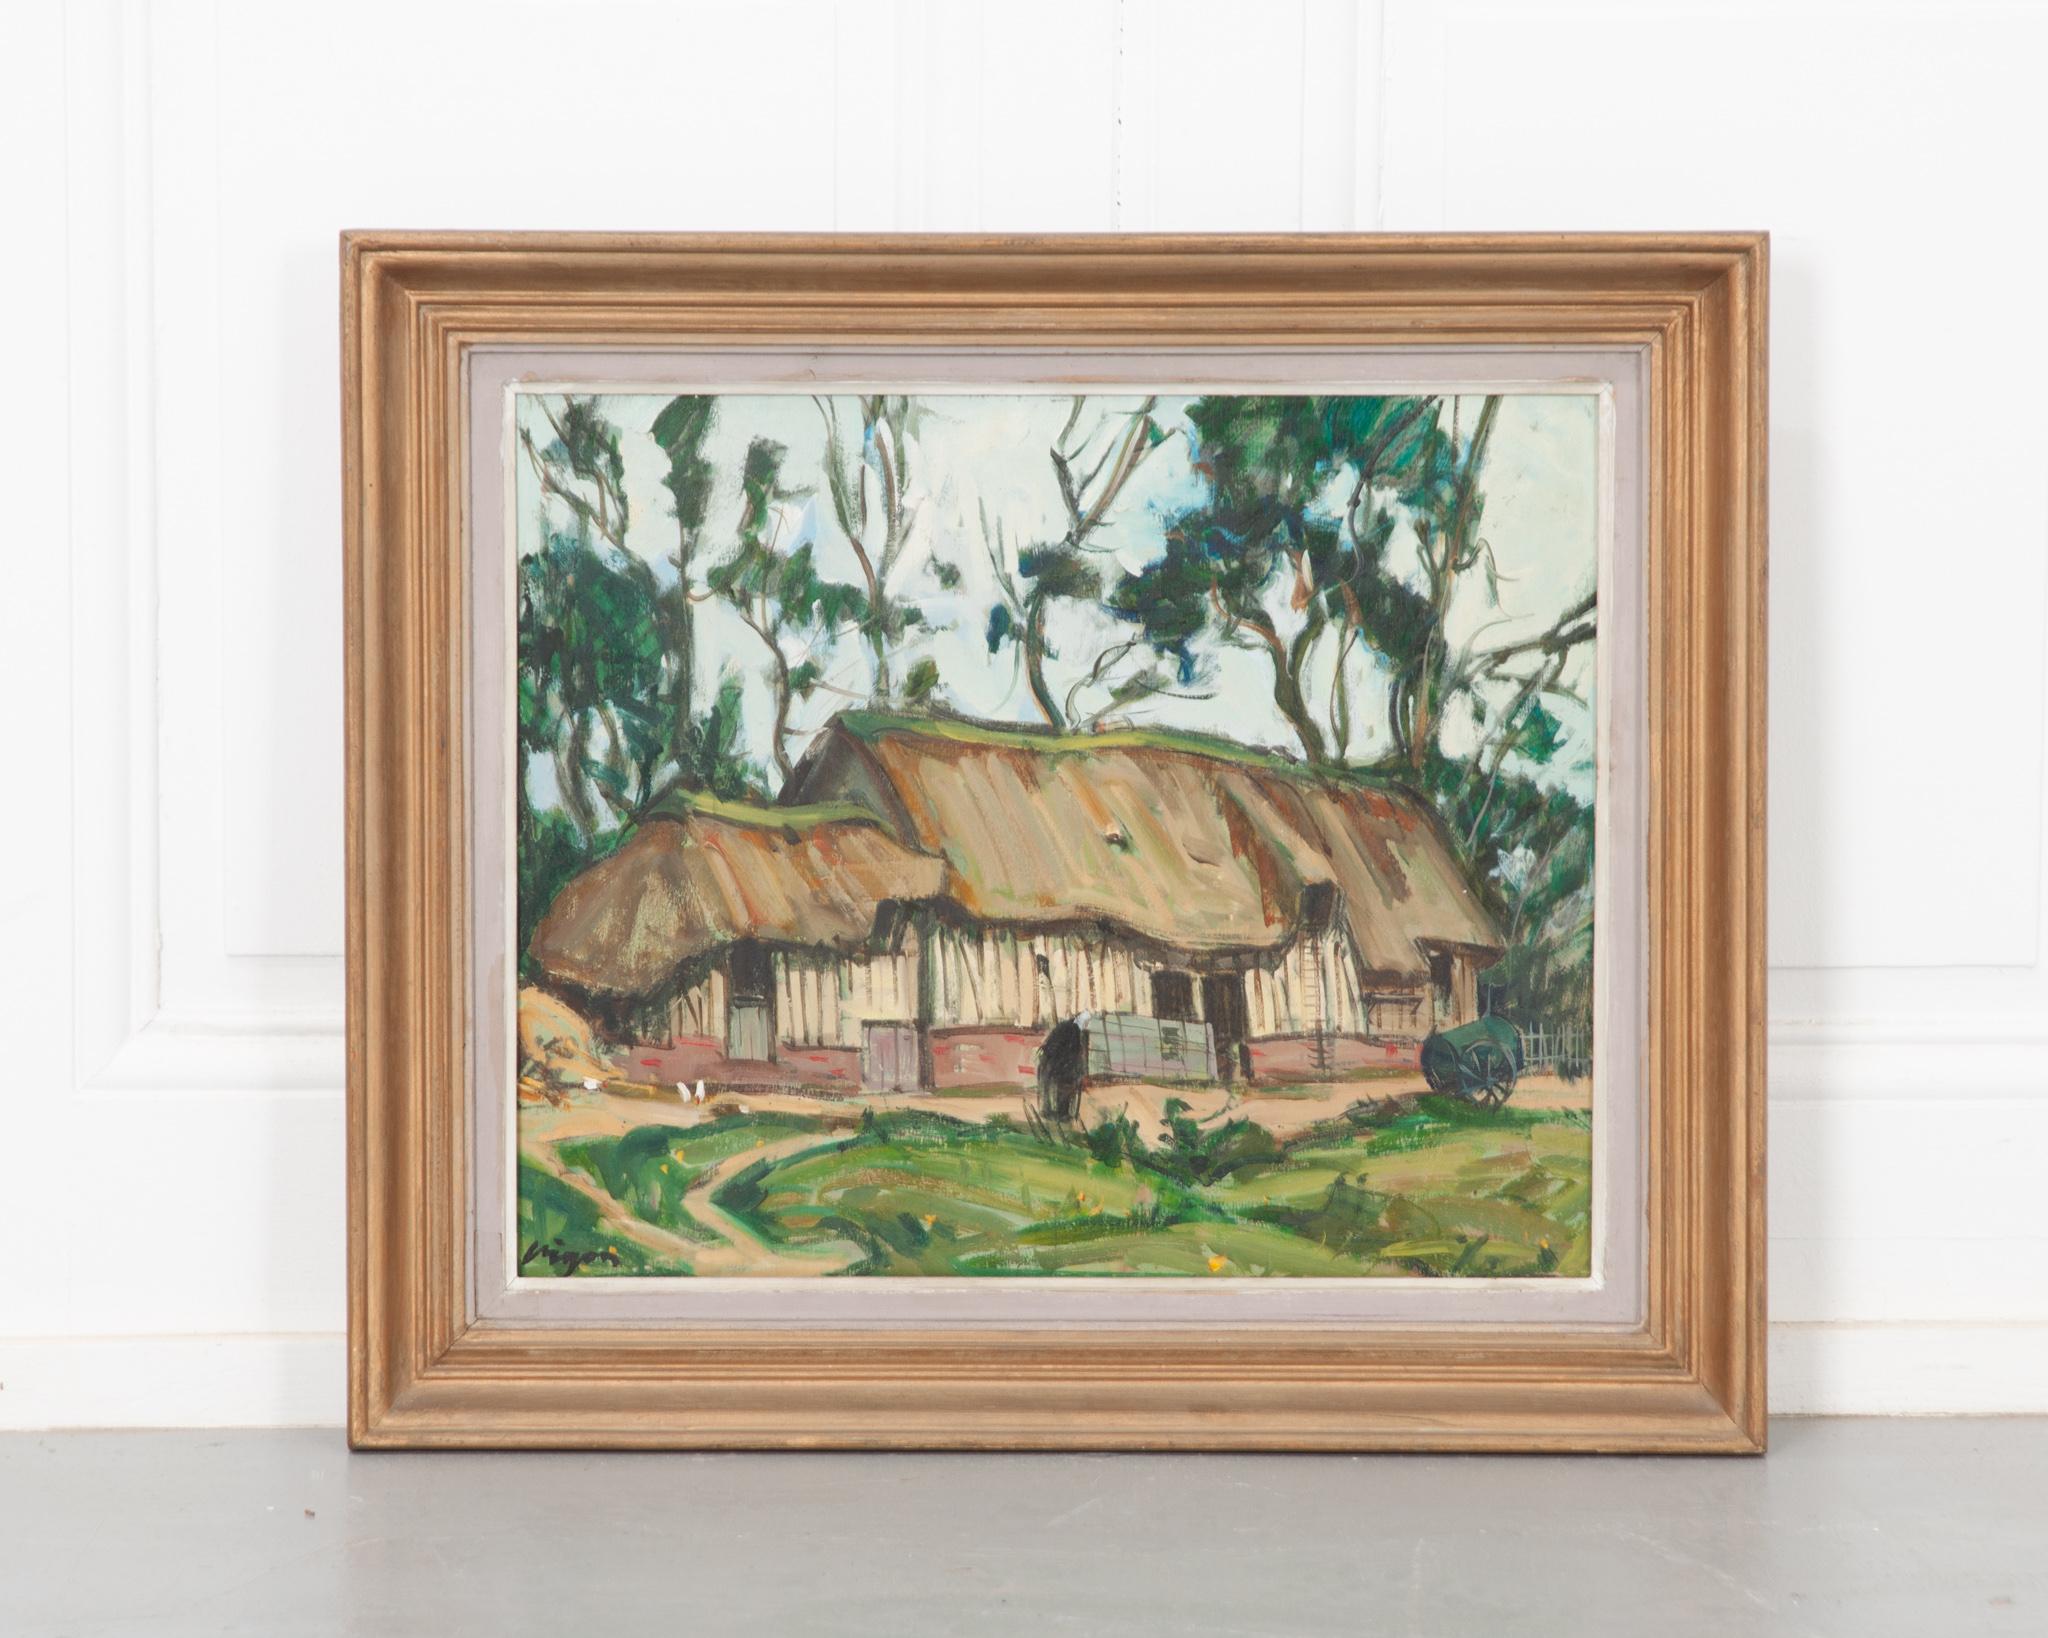 Oil on board, matted and framed in gilt gold. Depicts a serene thatched roof cottage, signed by artist. Circa 1920, in good condition. Make sure to view the detailed images for a closer look.